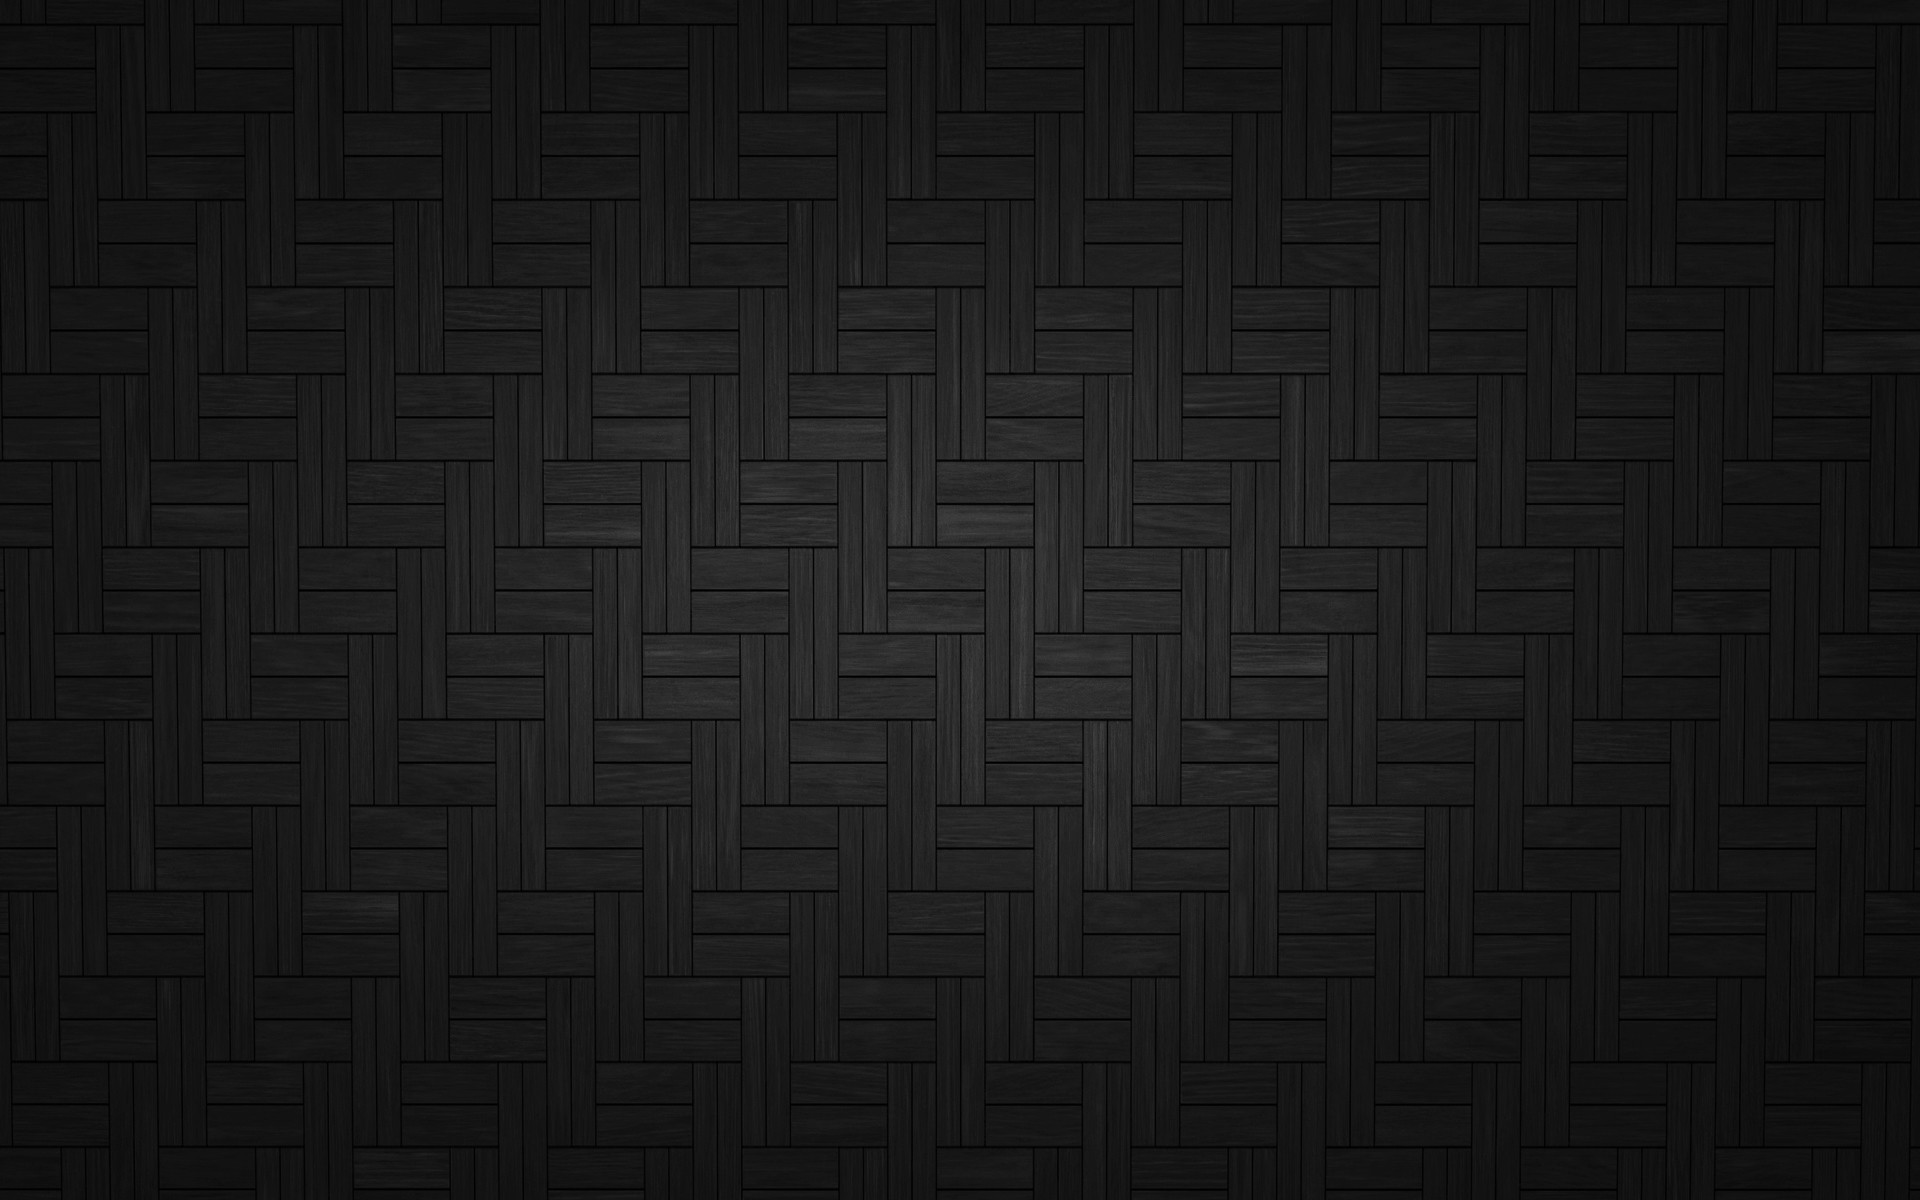  Black  background  HD    Download  free  cool wallpapers  for 